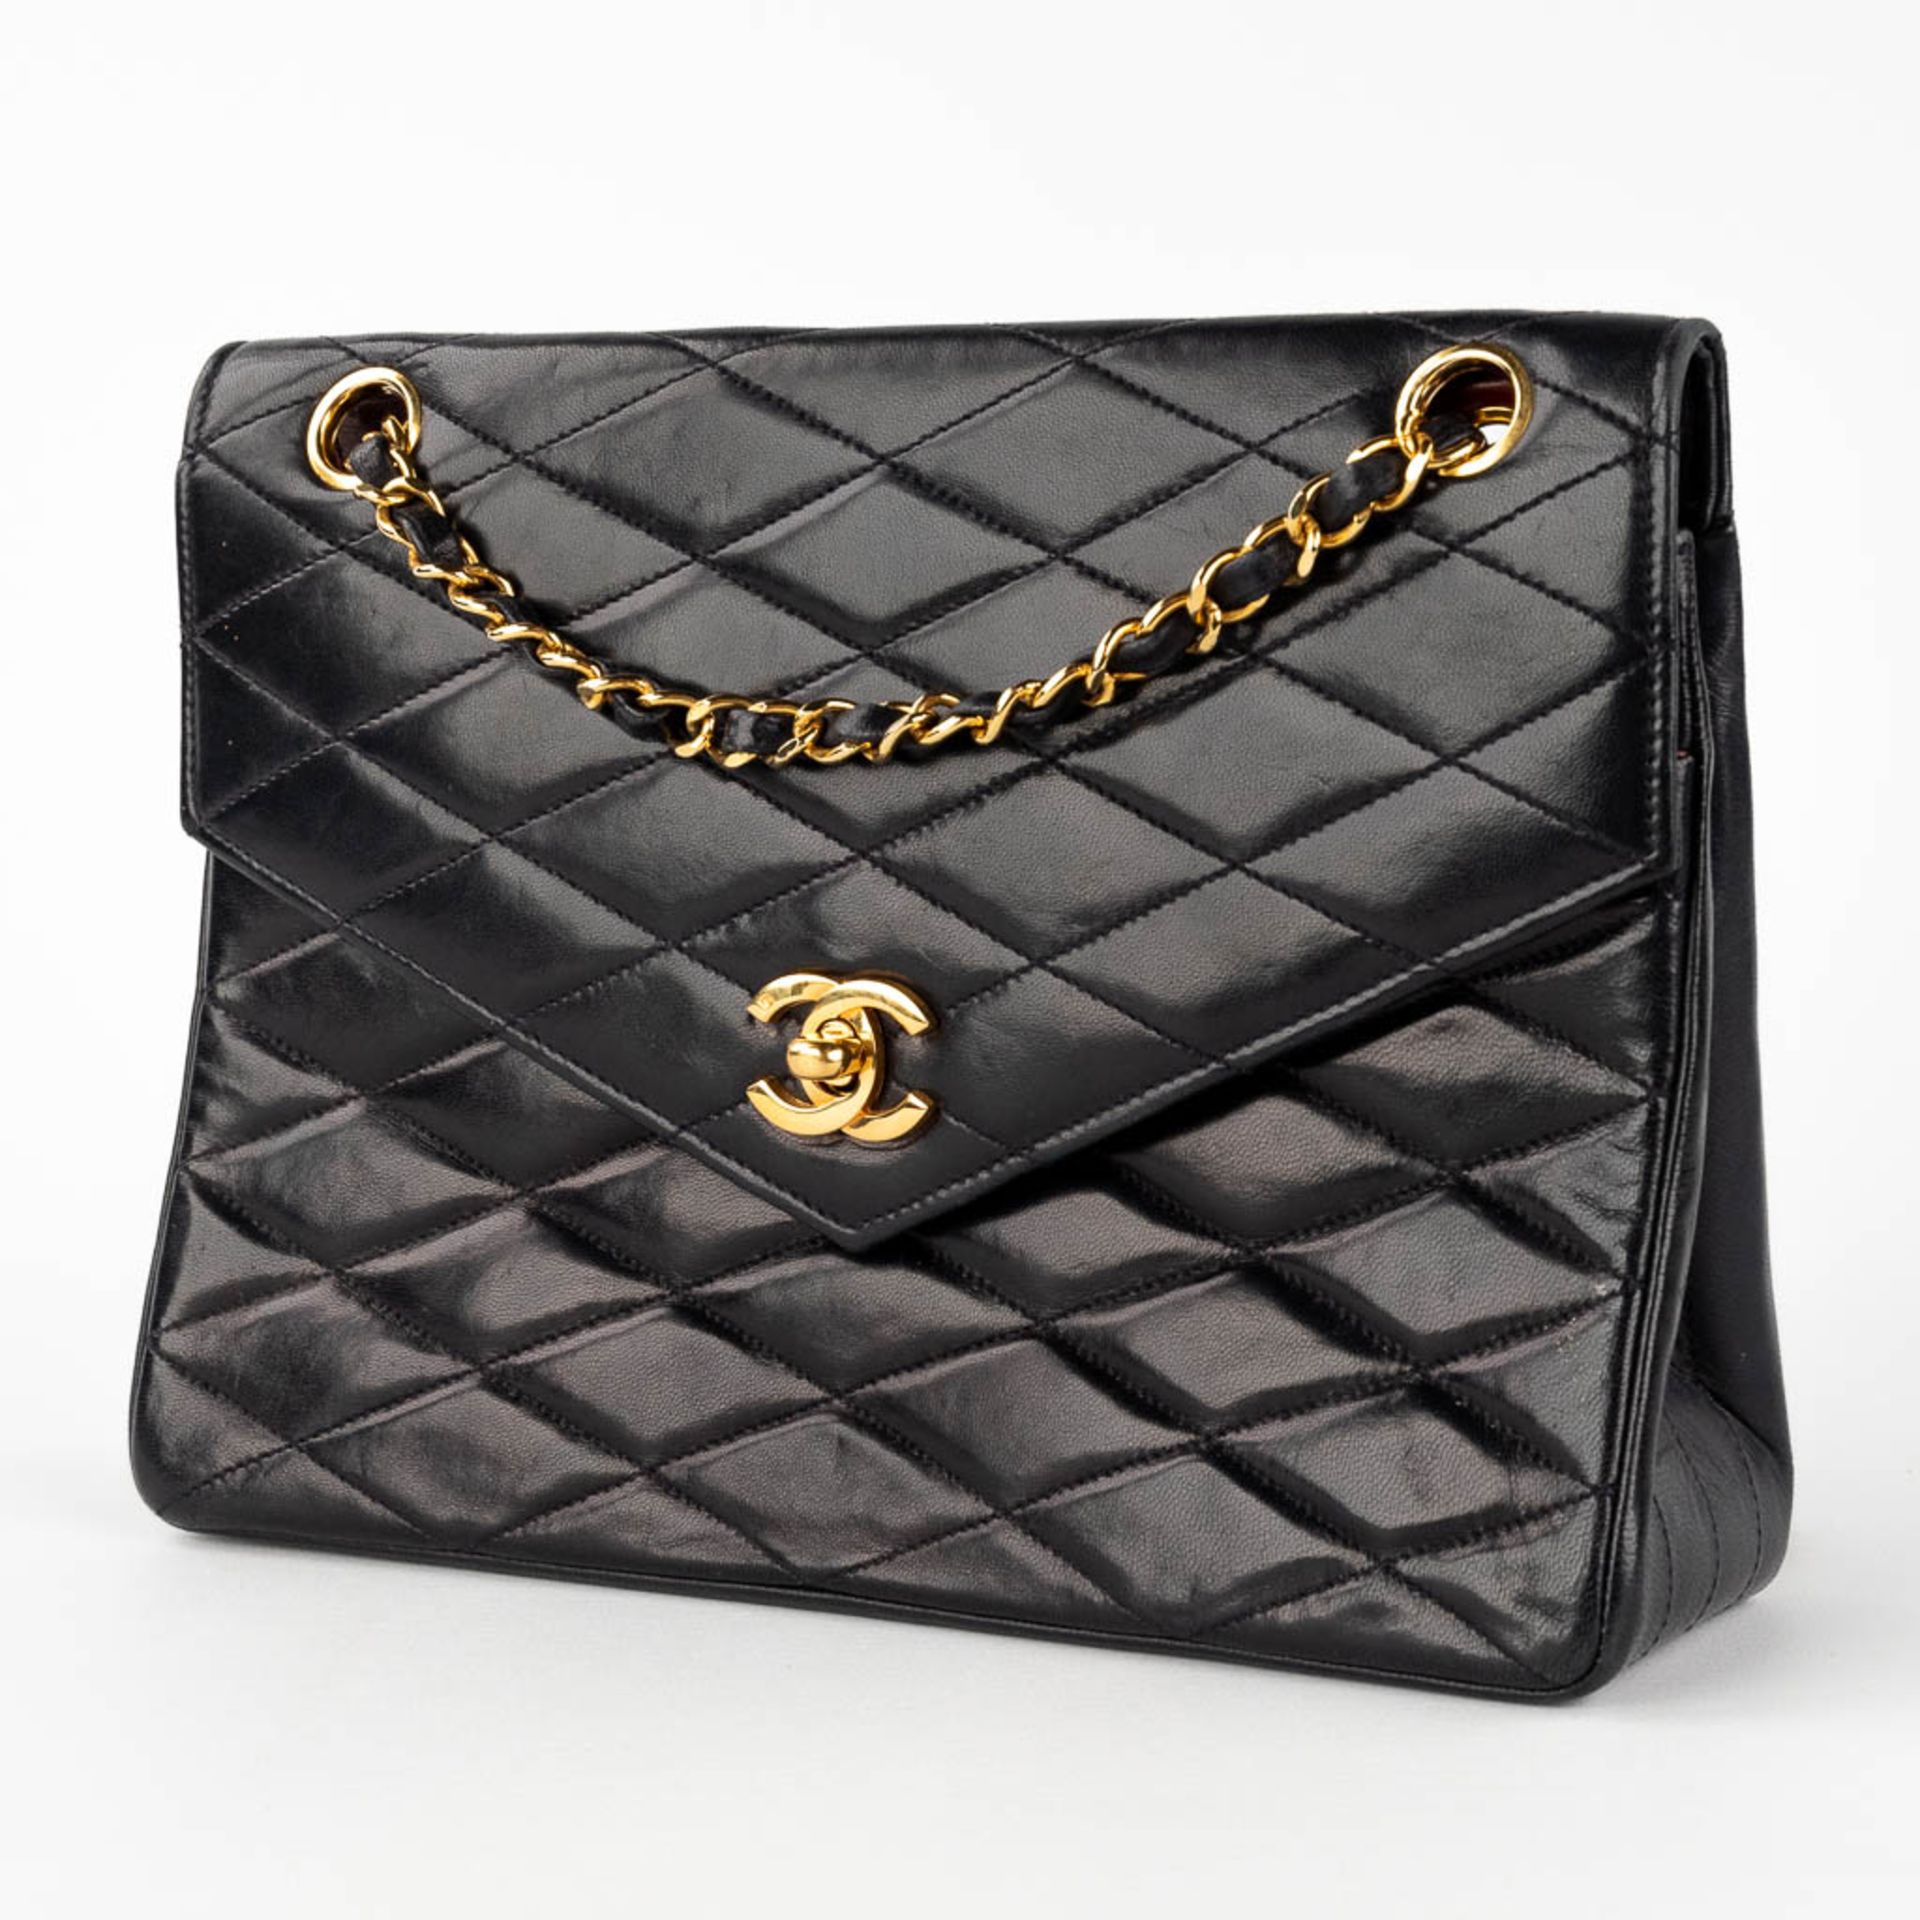 Chanel, a handbag made of dark blue/black leather with gold-plated hardware. Circa 1970. (W: 25 x H: